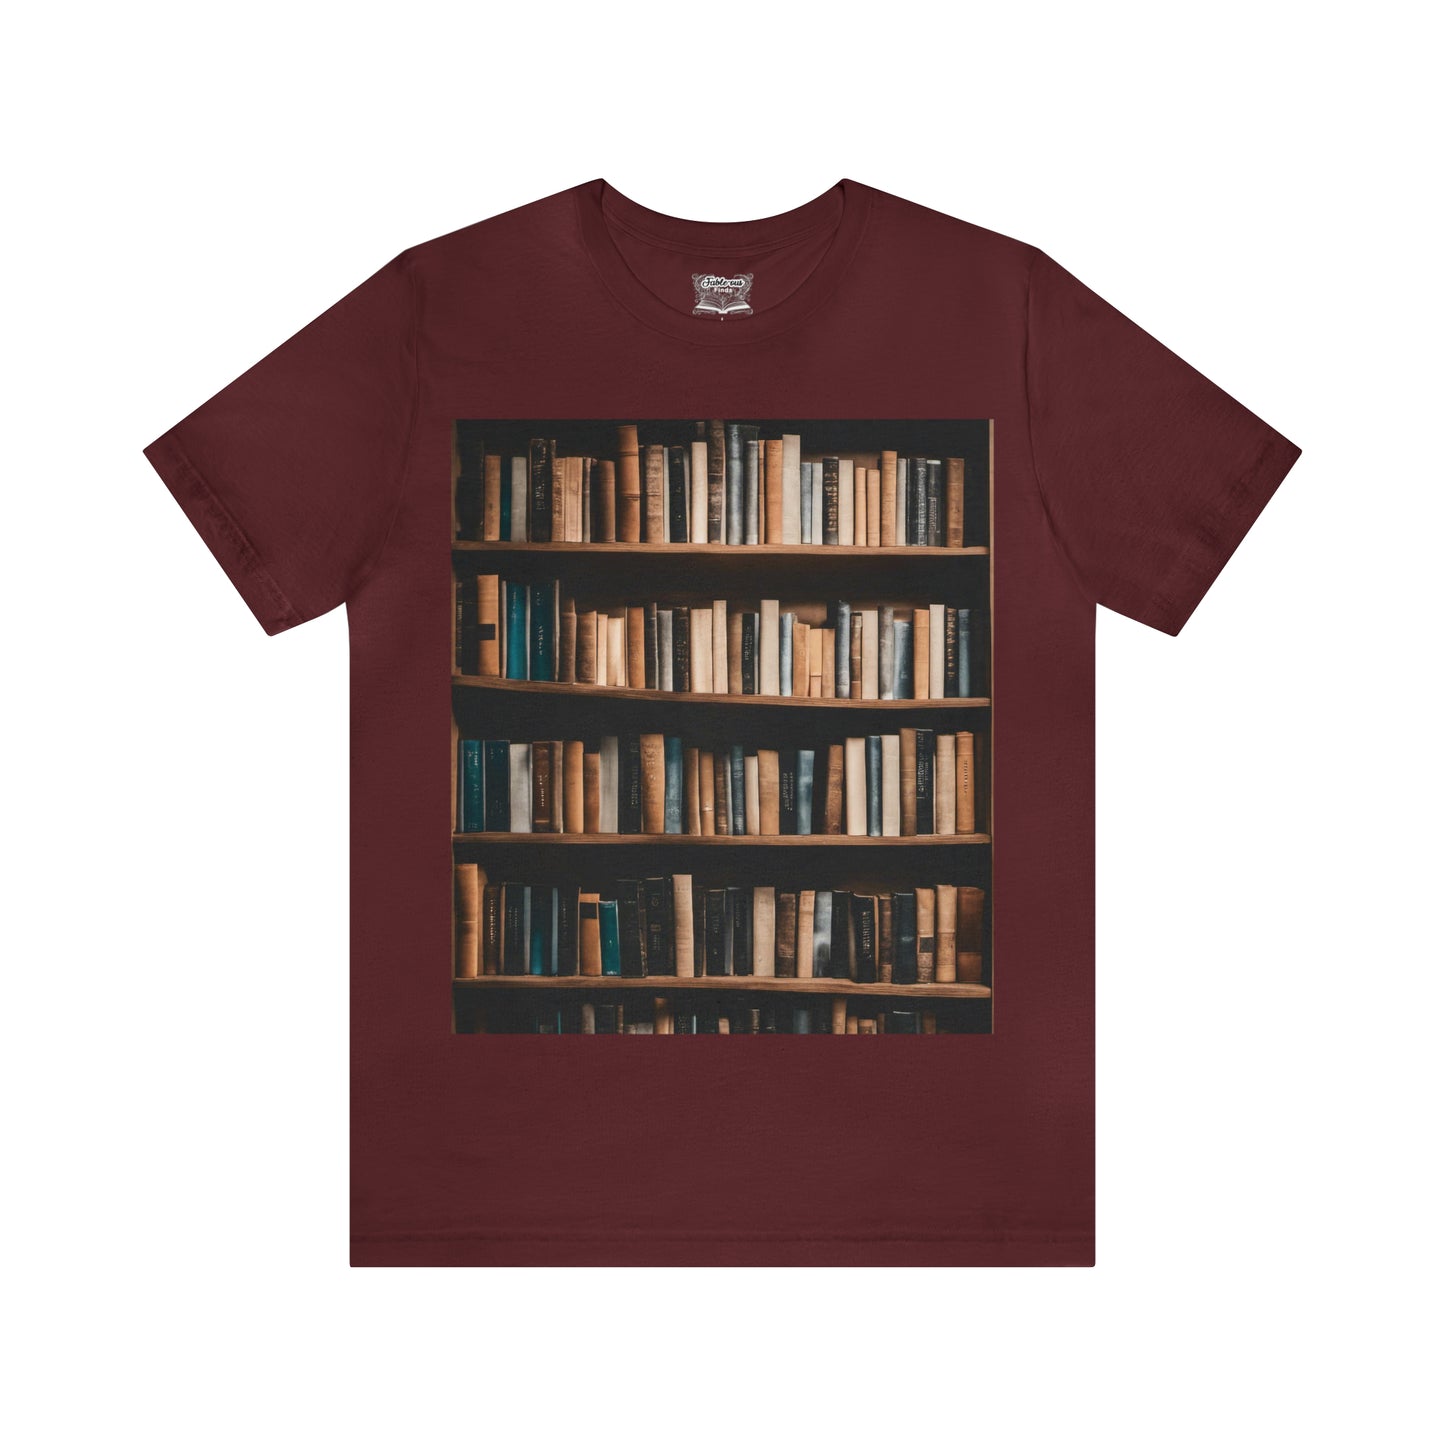 "I'm a Library" Halloween Tee - Lazy Funny Halloween Costume